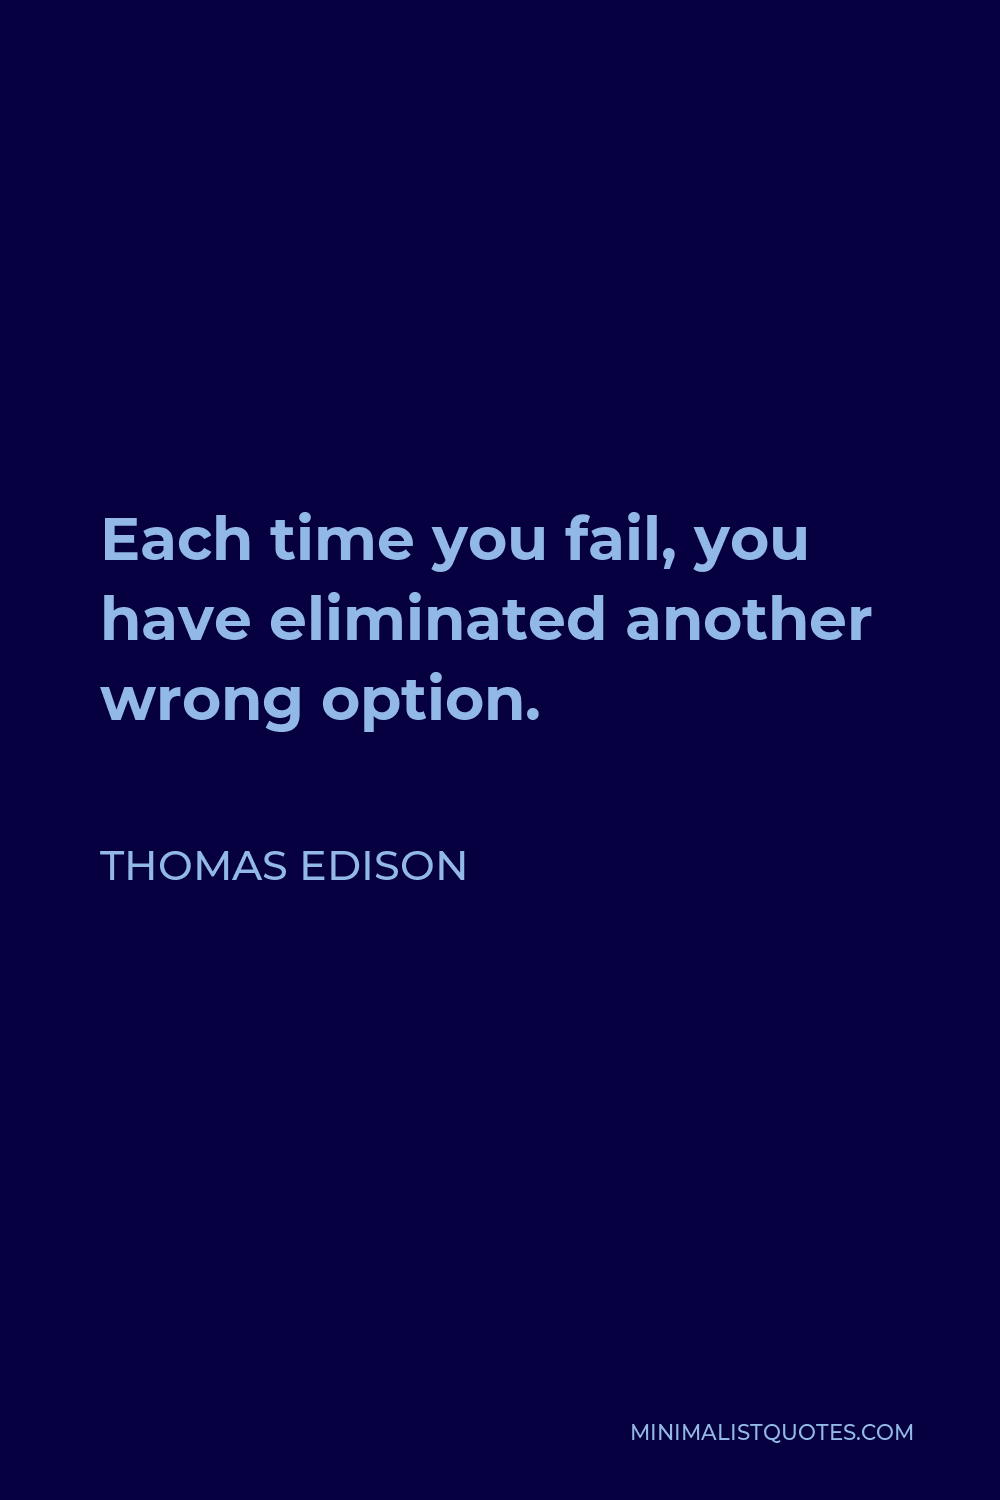 Thomas Edison Quote - Each time you fail, you have eliminated another wrong option.